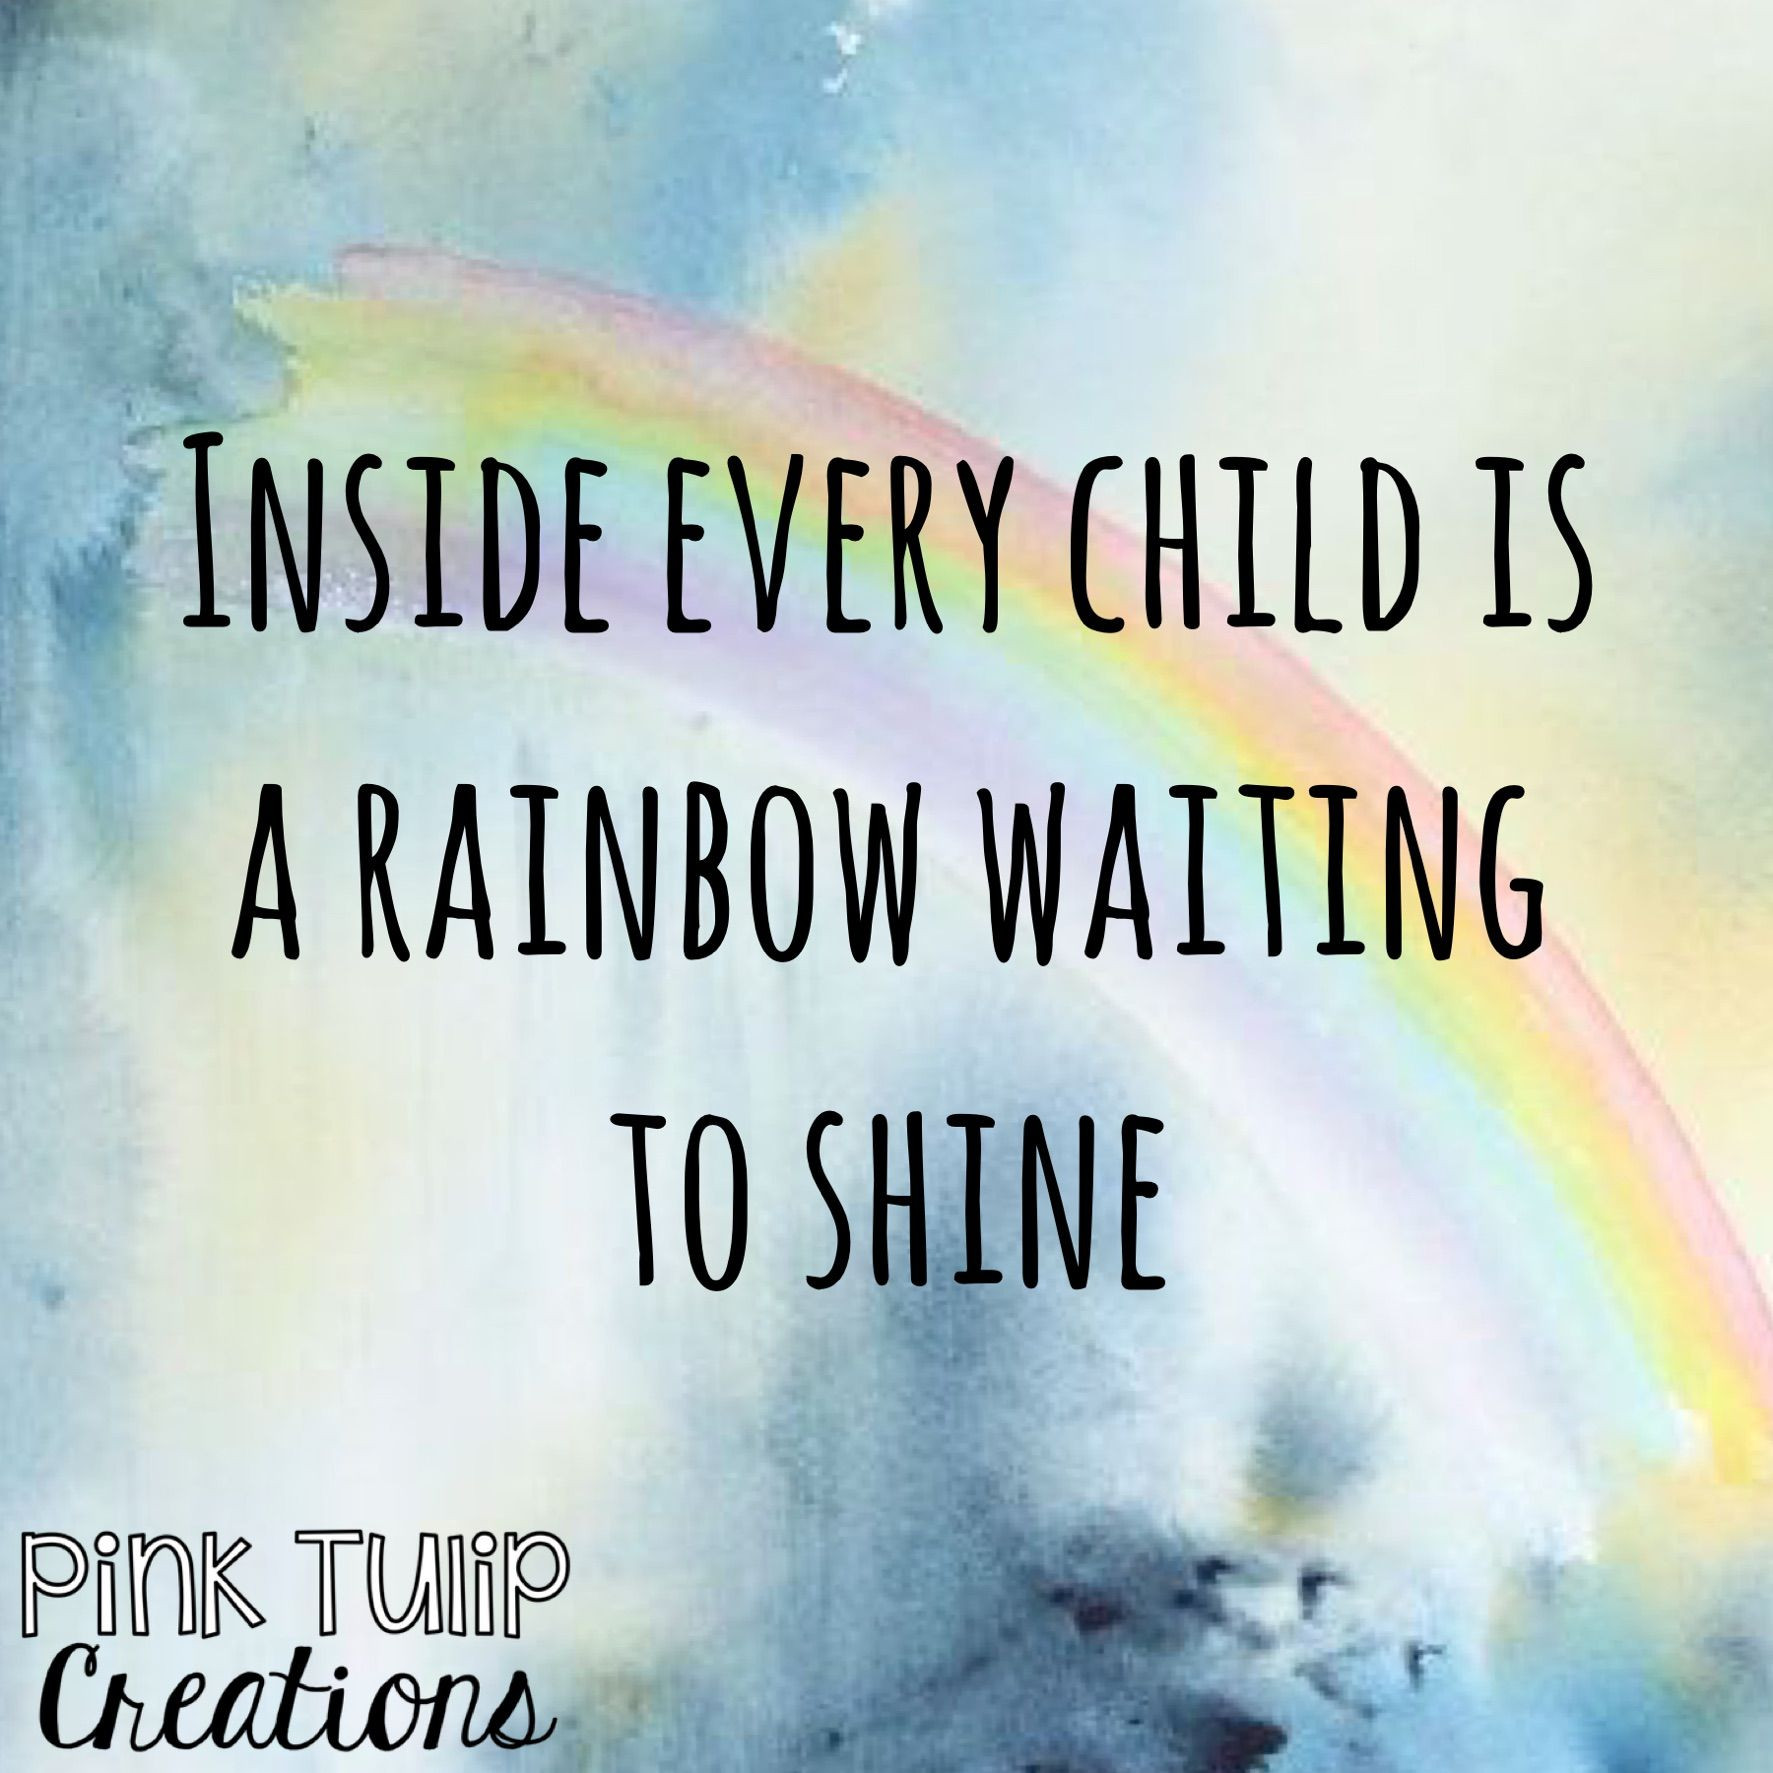 Child Education Quote
 Inside every child is a rainbow waiting to shine